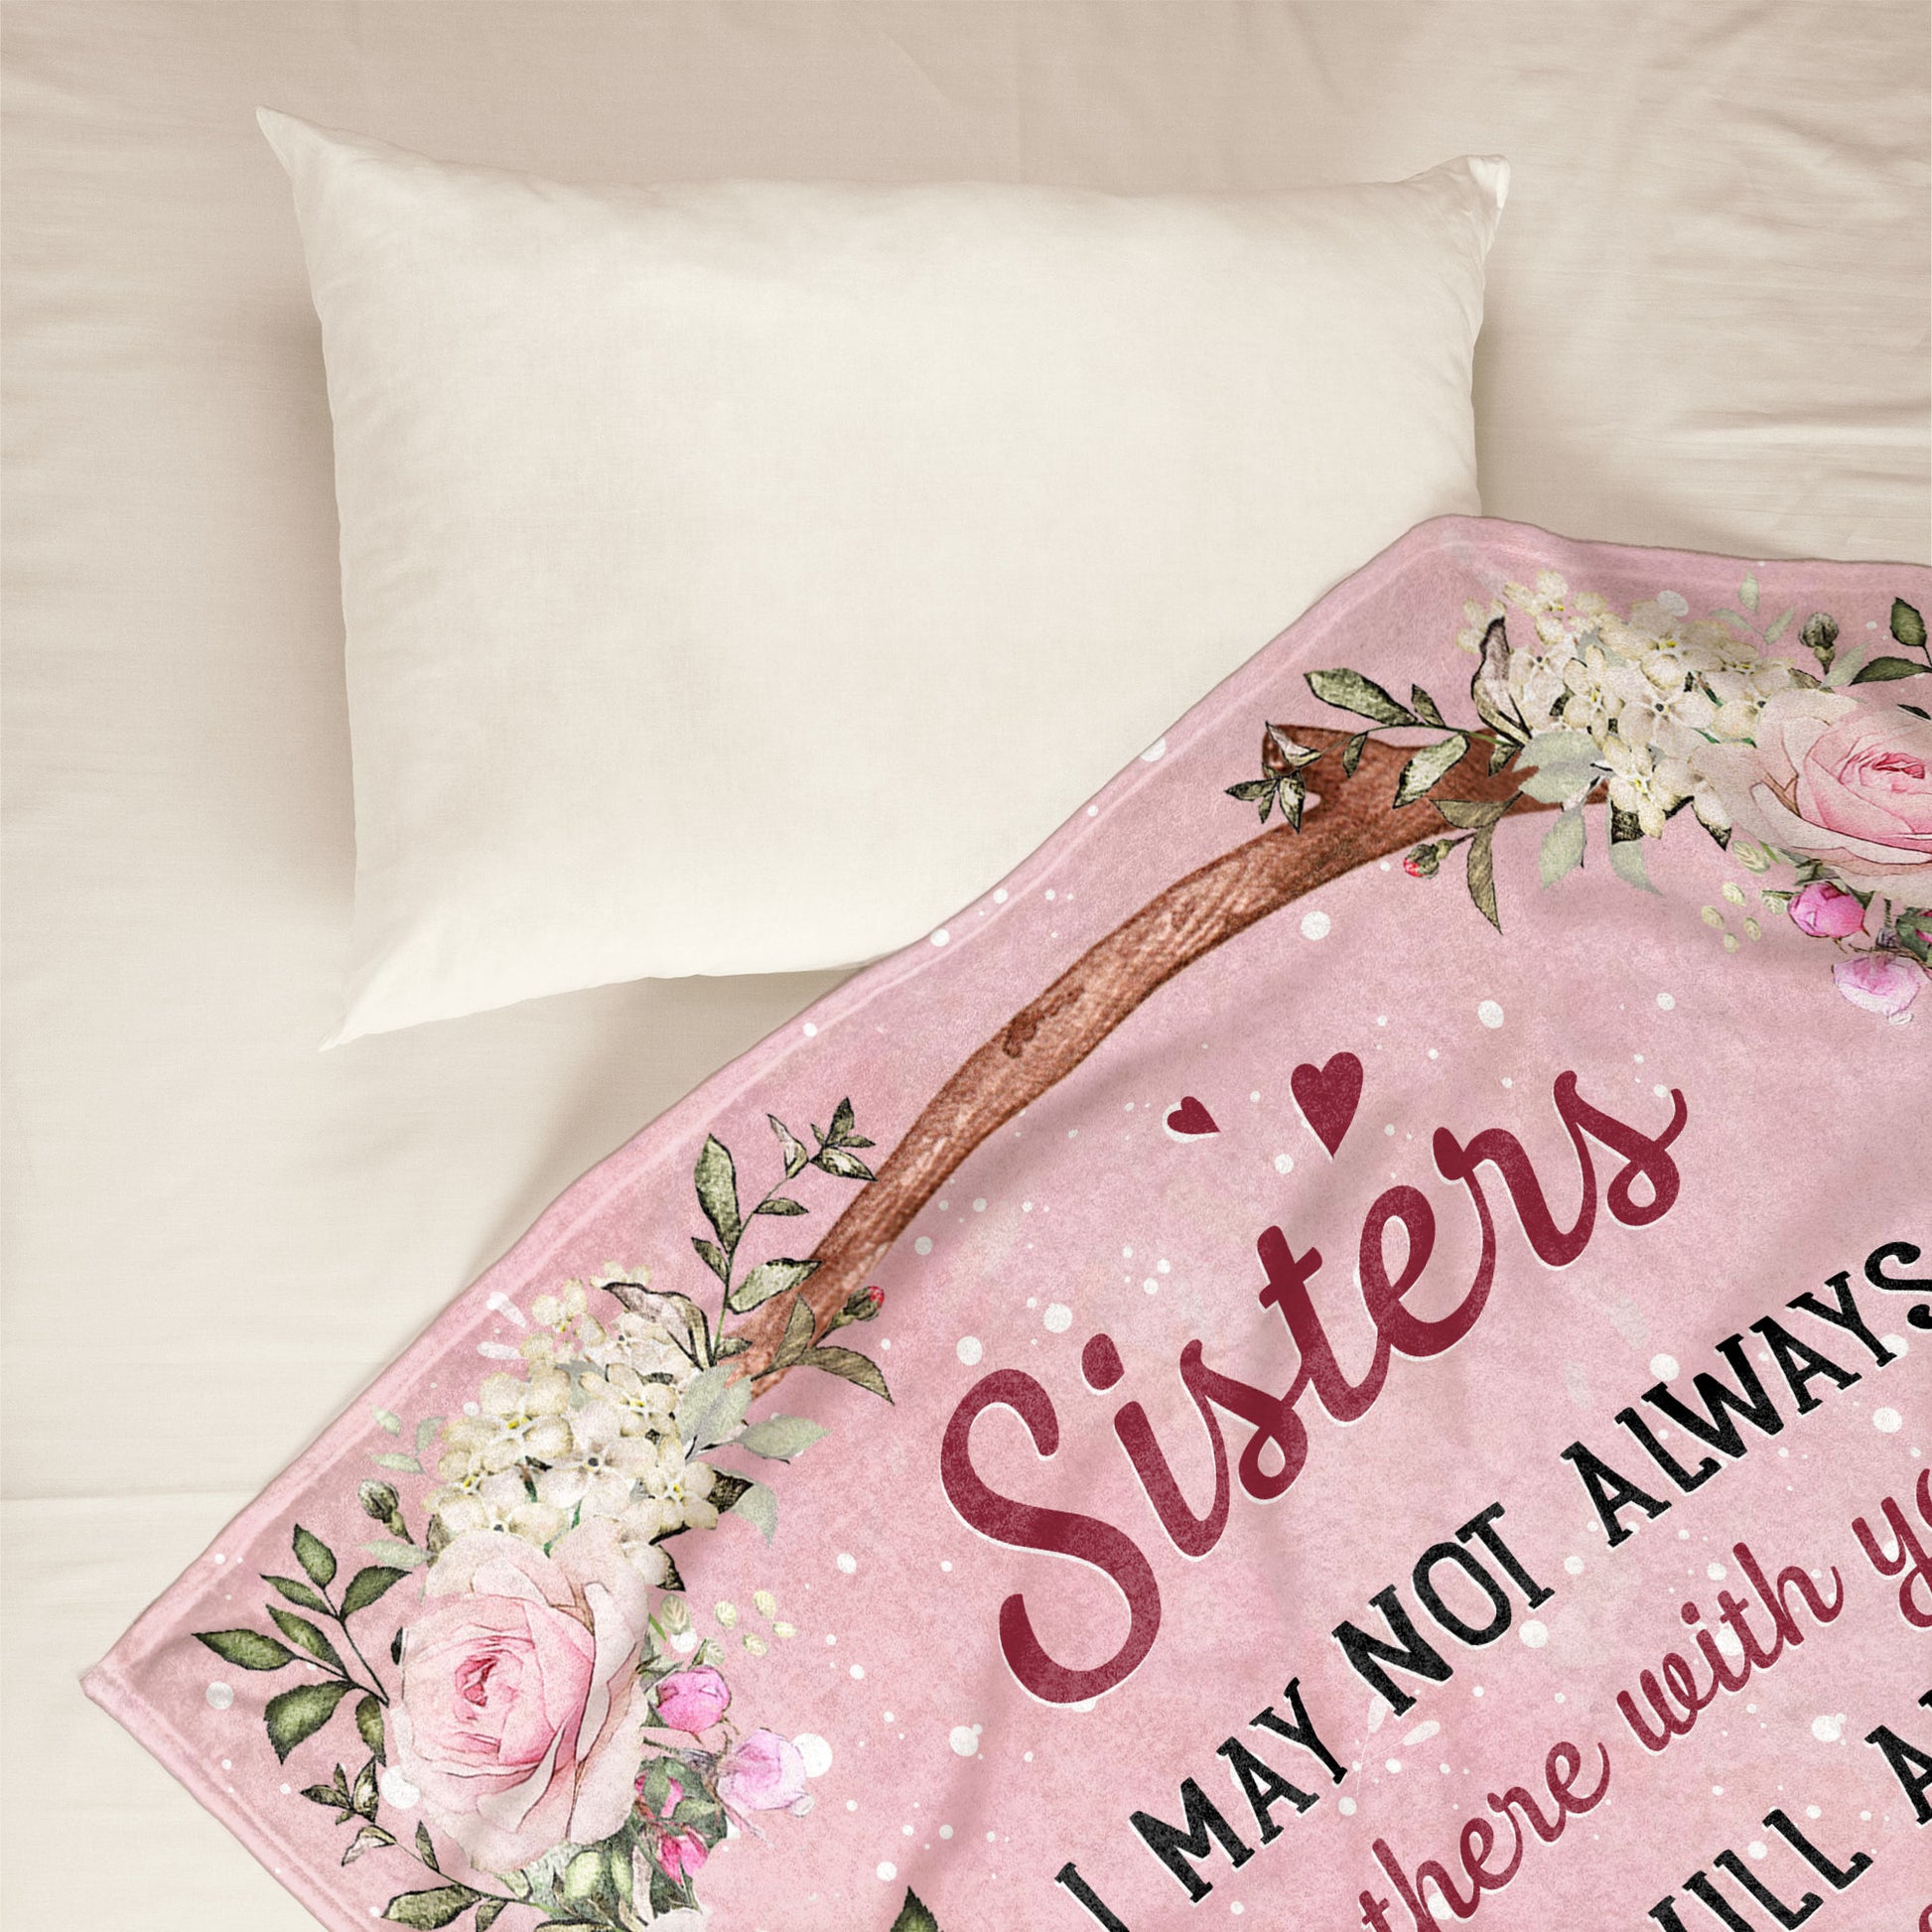 Sister I'Ll Always Be There For You - Personalized Blanket - Birthday, Sister's day Gift For Sisters